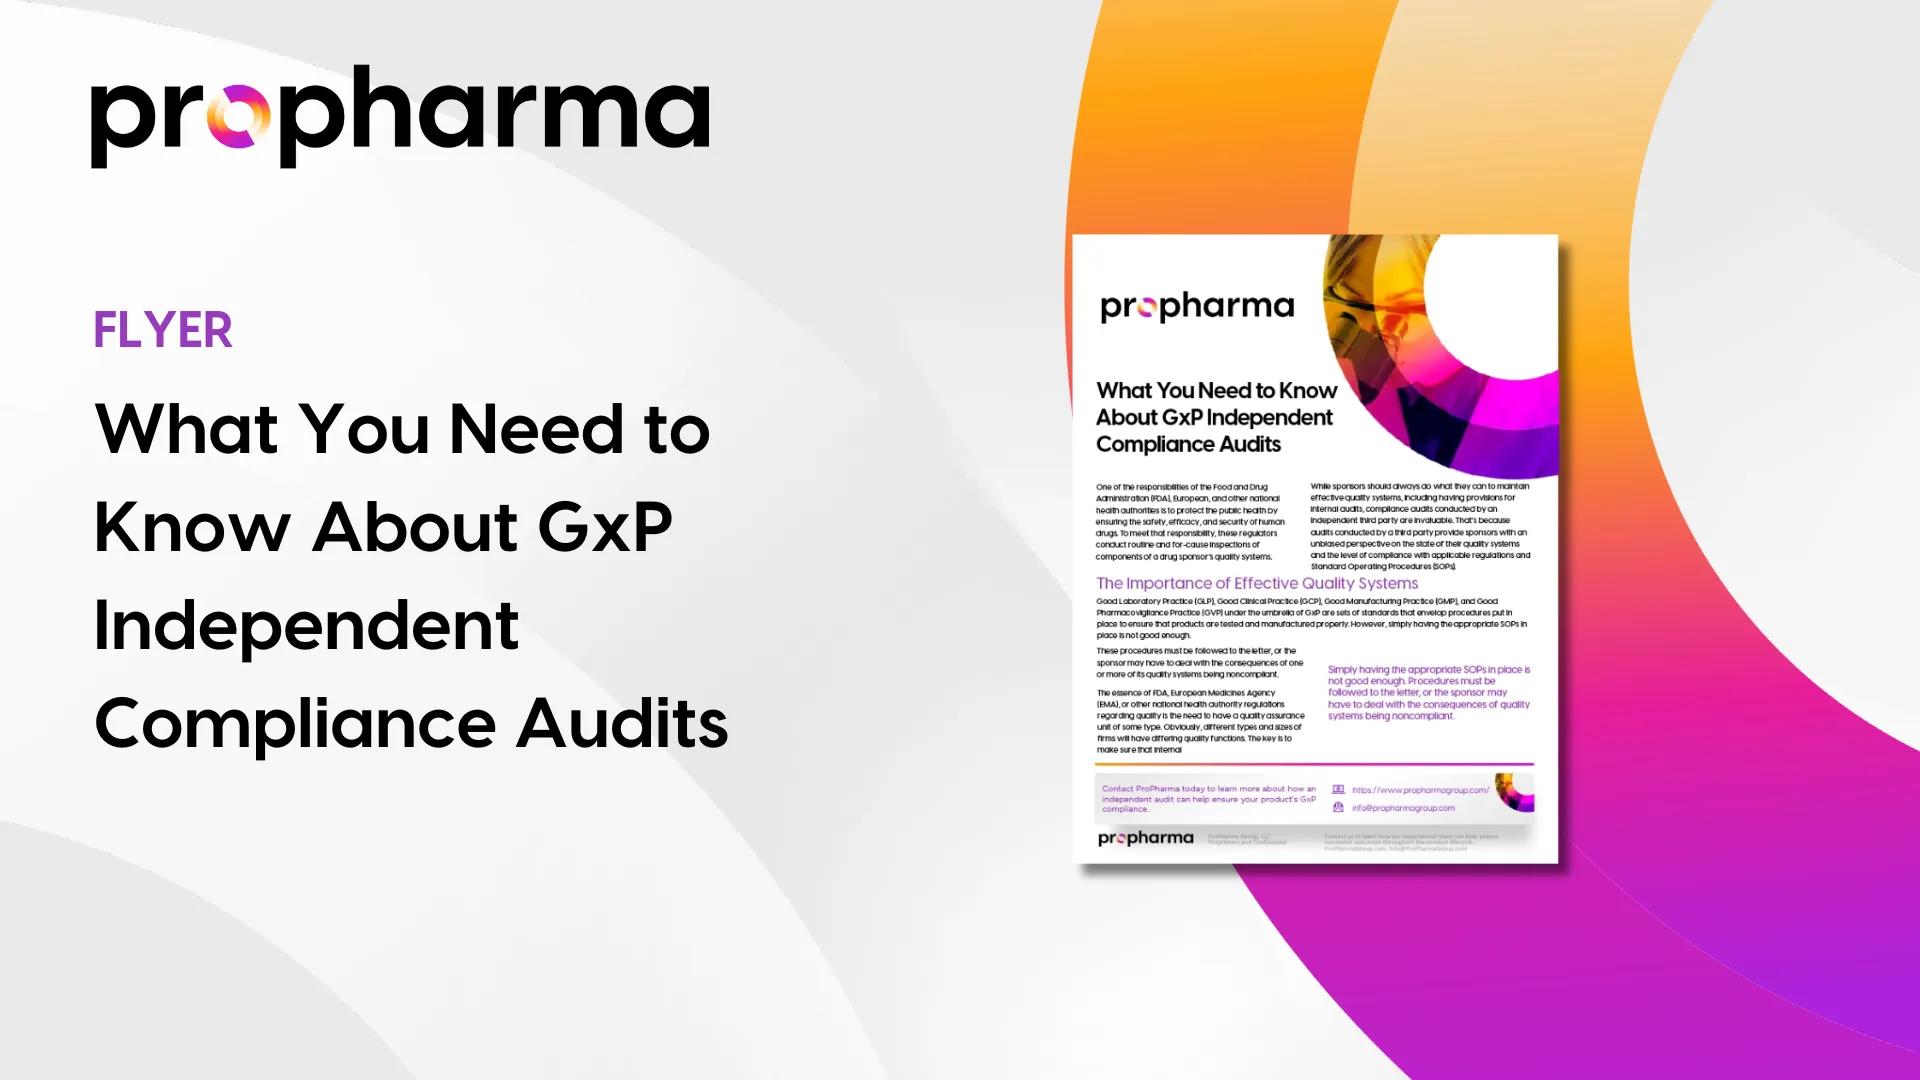 What You Need to Know About GxP Independent Compliance Audits